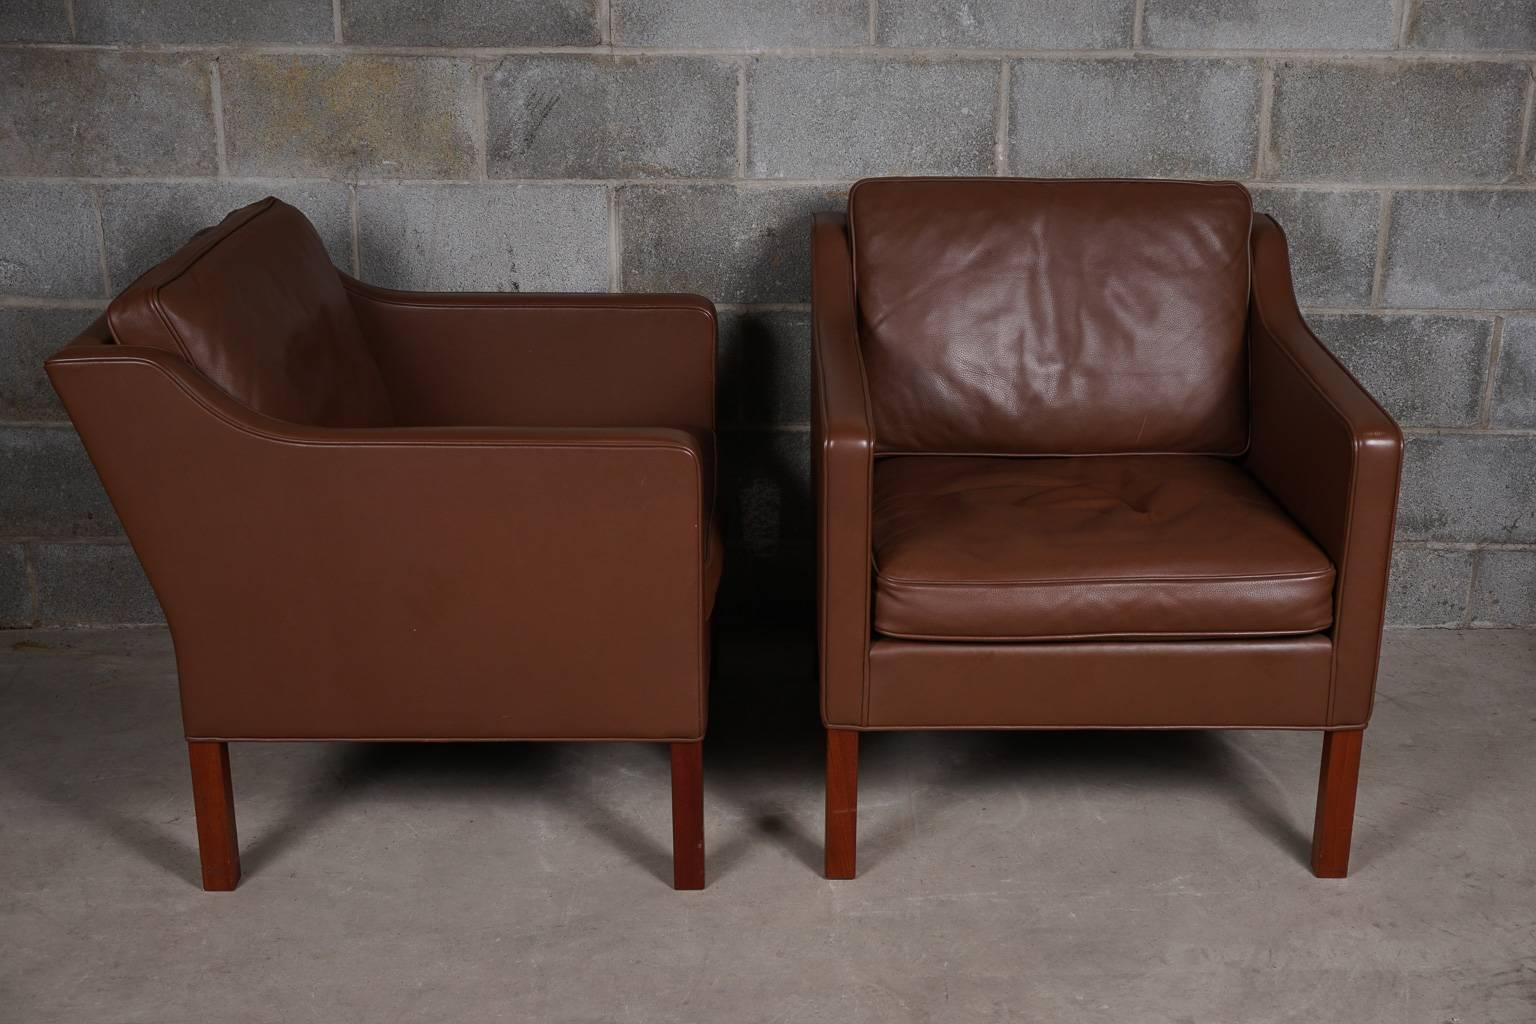 Pair of Børge Mogensen lounge chairs in brown leather. Original leather and solid mahogany legs. Model 2421, produced by Fredericia Stolefabrik and designed in 1963. Great condition.